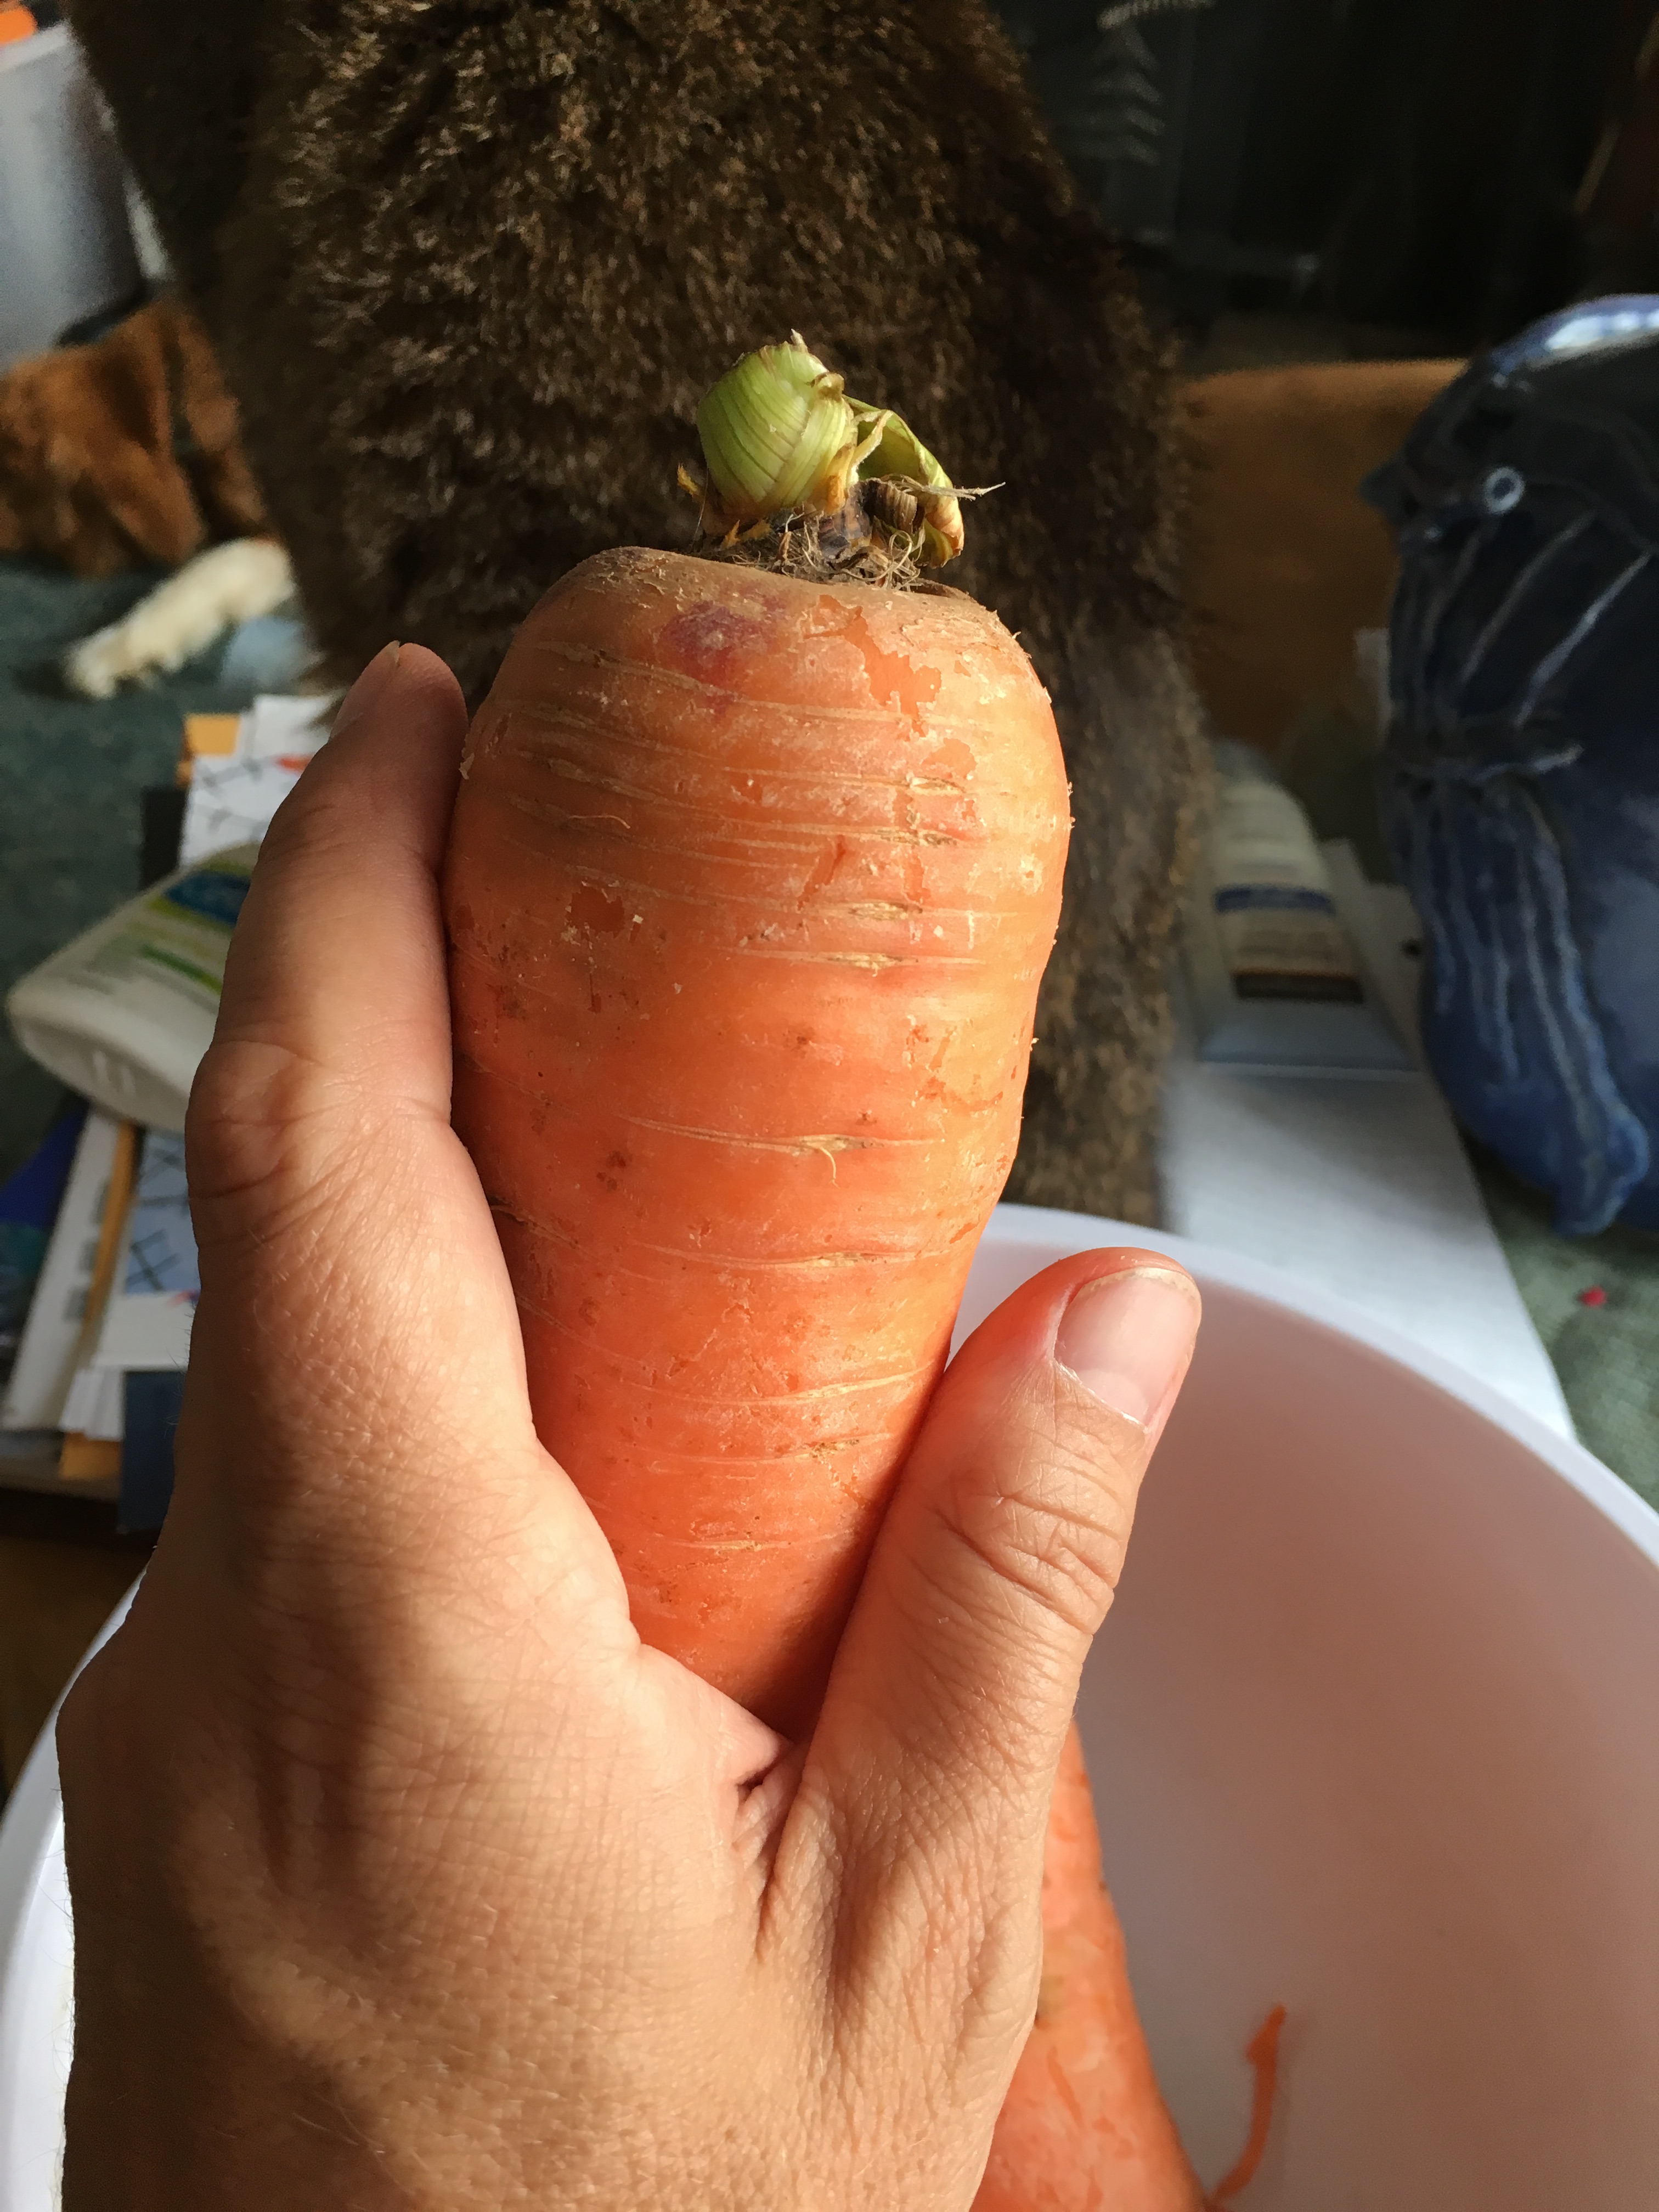 This is what the dragon looked like when it was still a carrot.